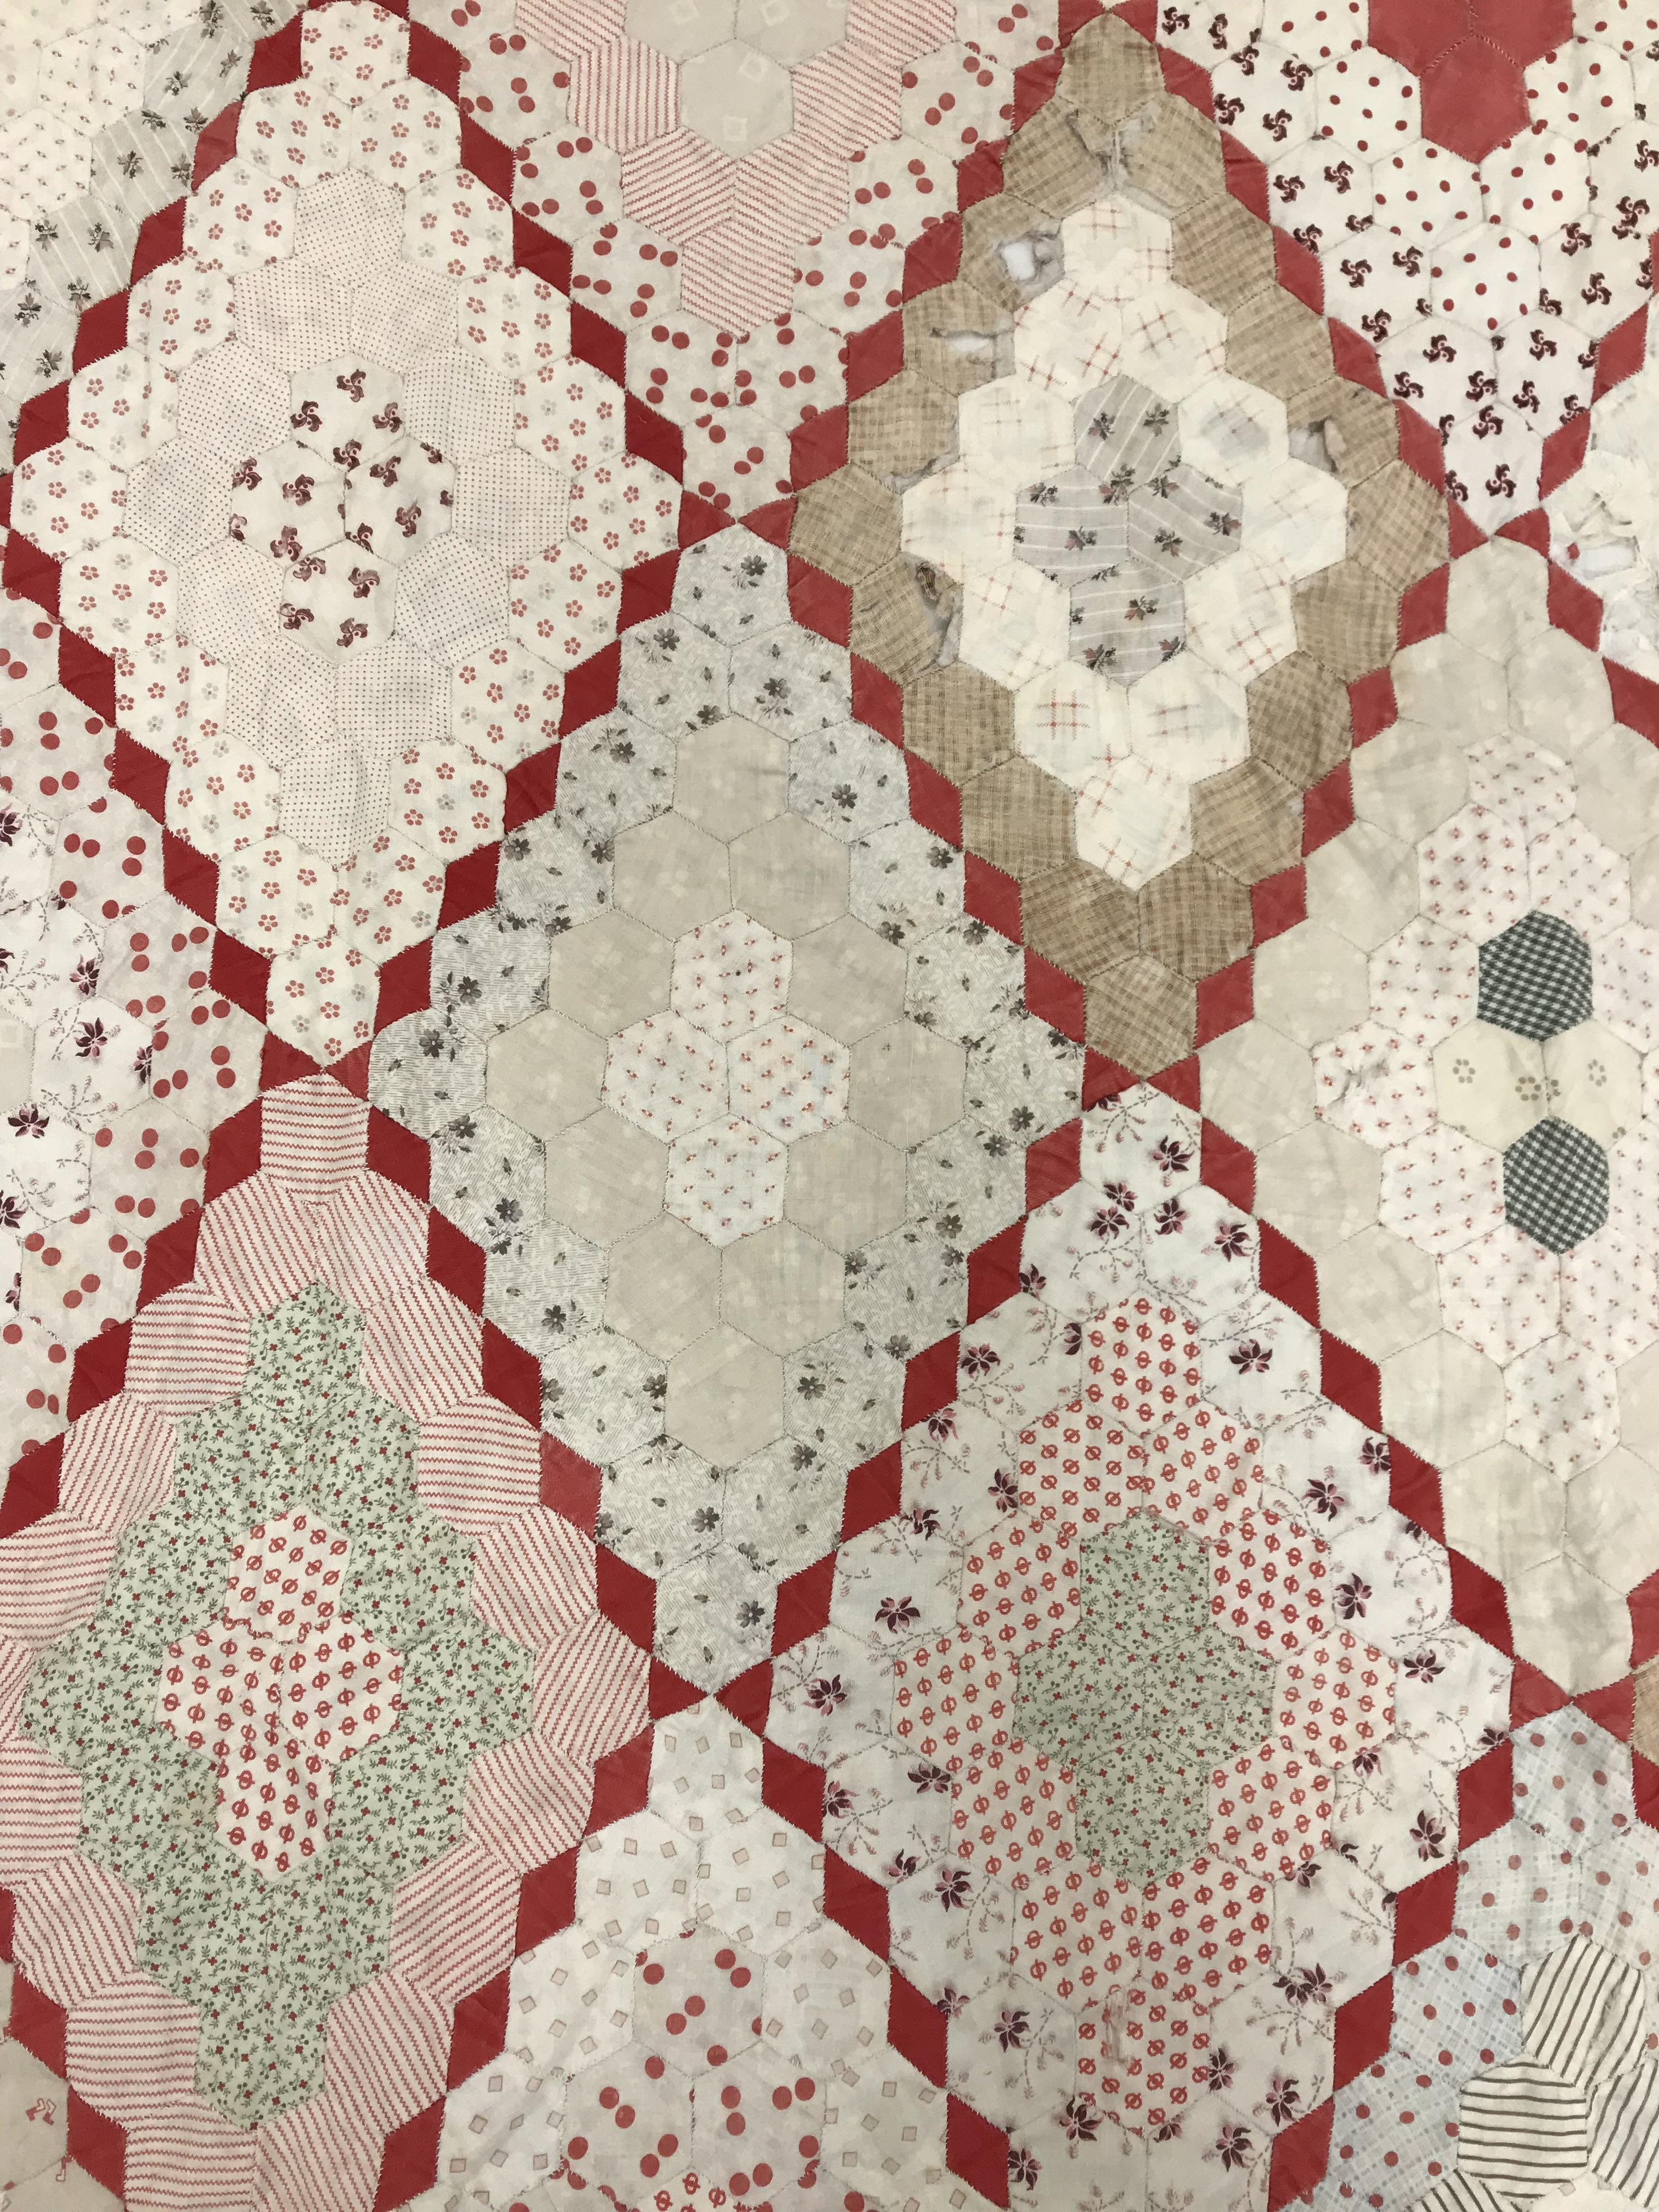 An early 20th Century hand-stitched, pieced quilt, backed with plain fabric and no wadding, - Image 8 of 36